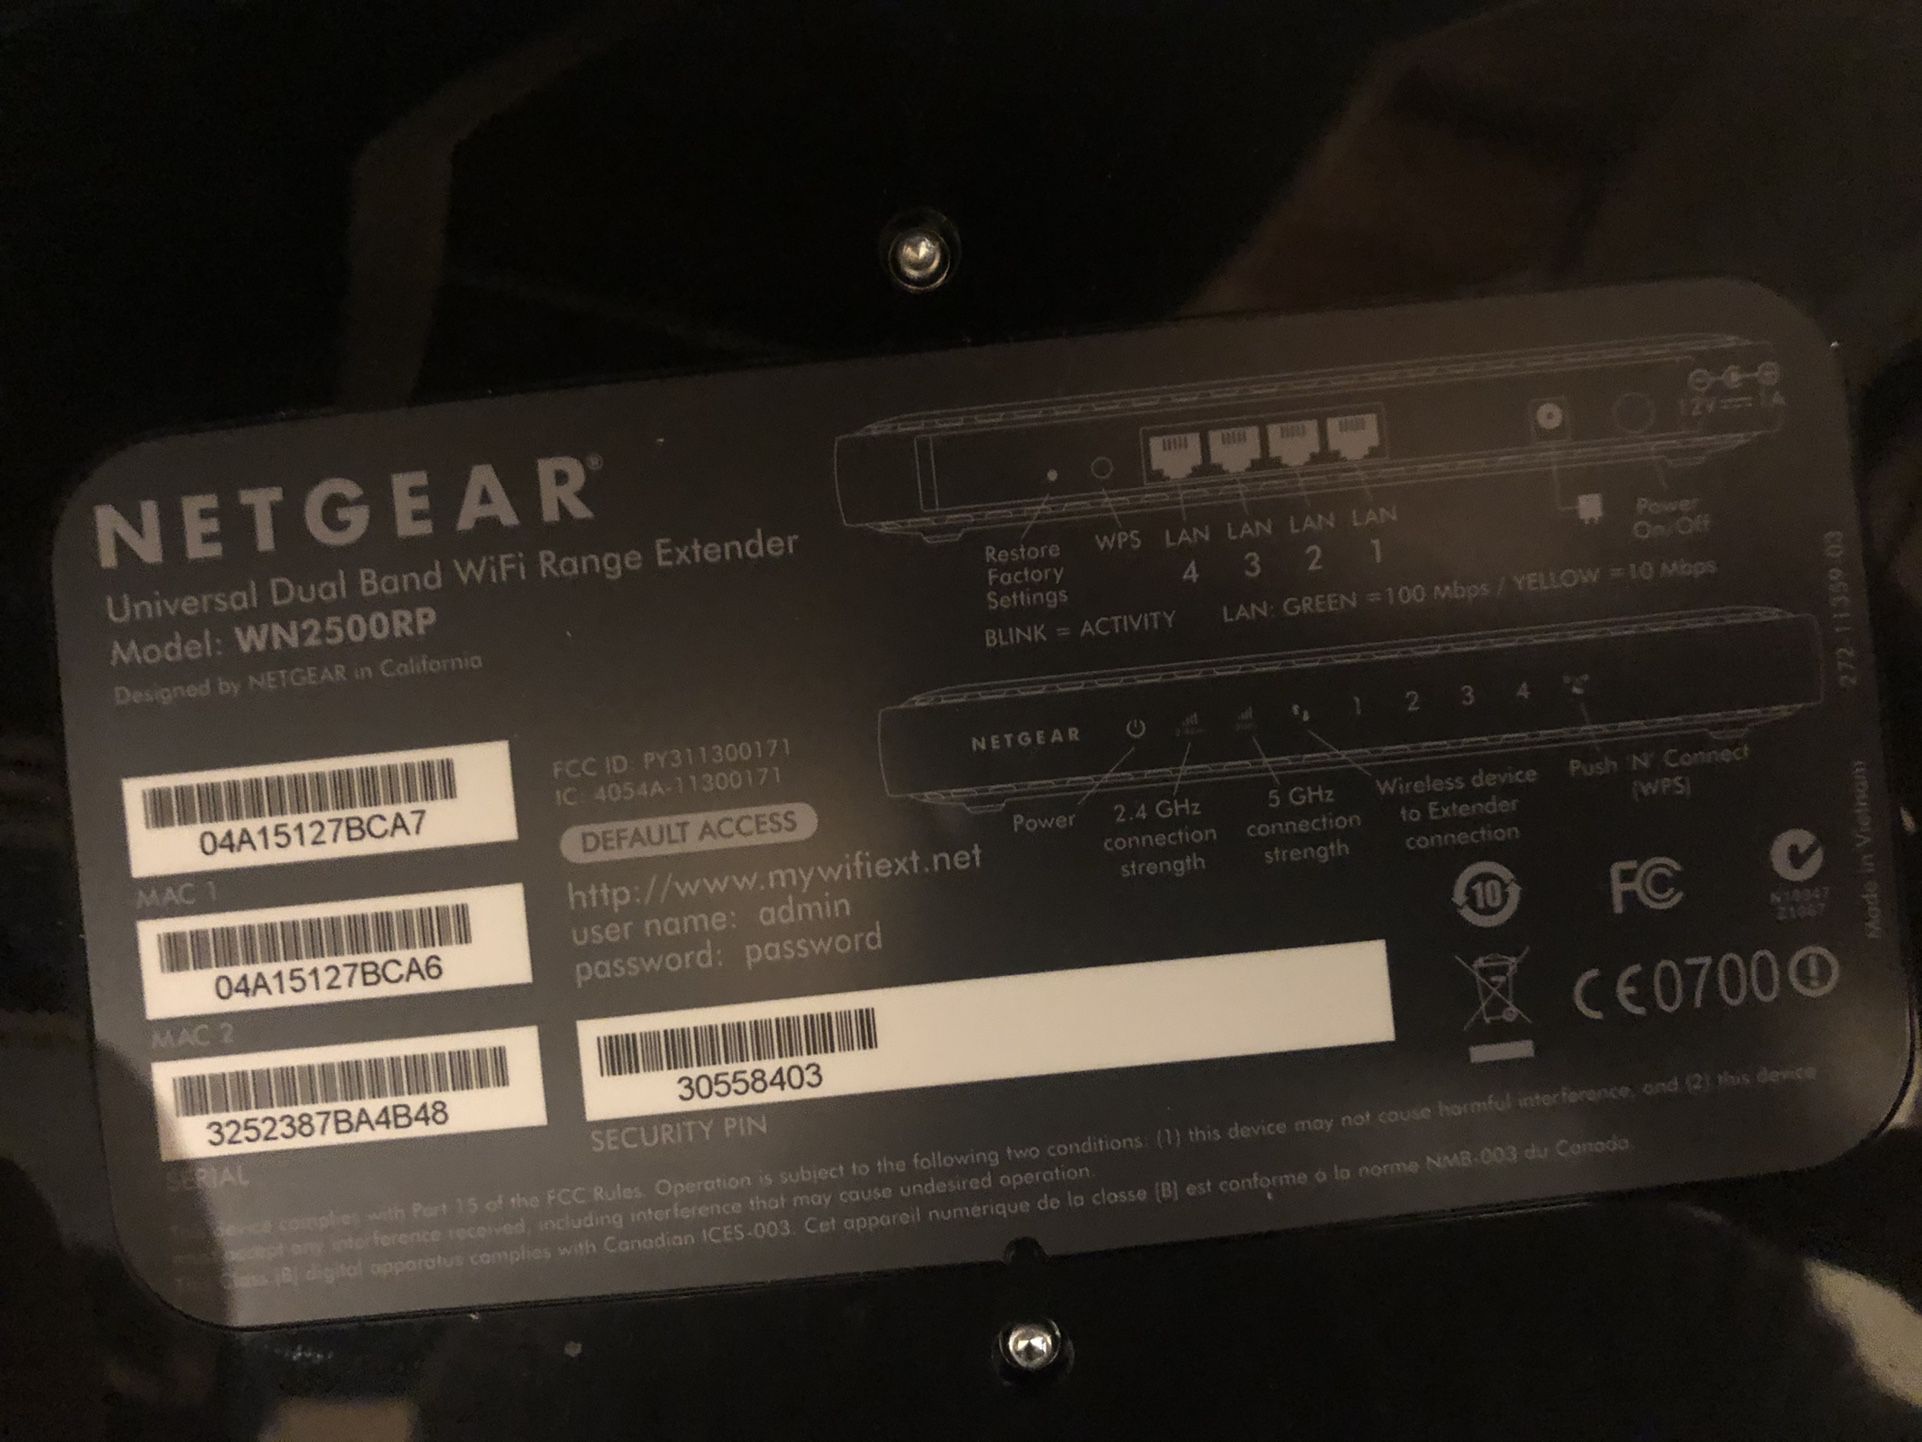 Awesome Netgear Router and Extender